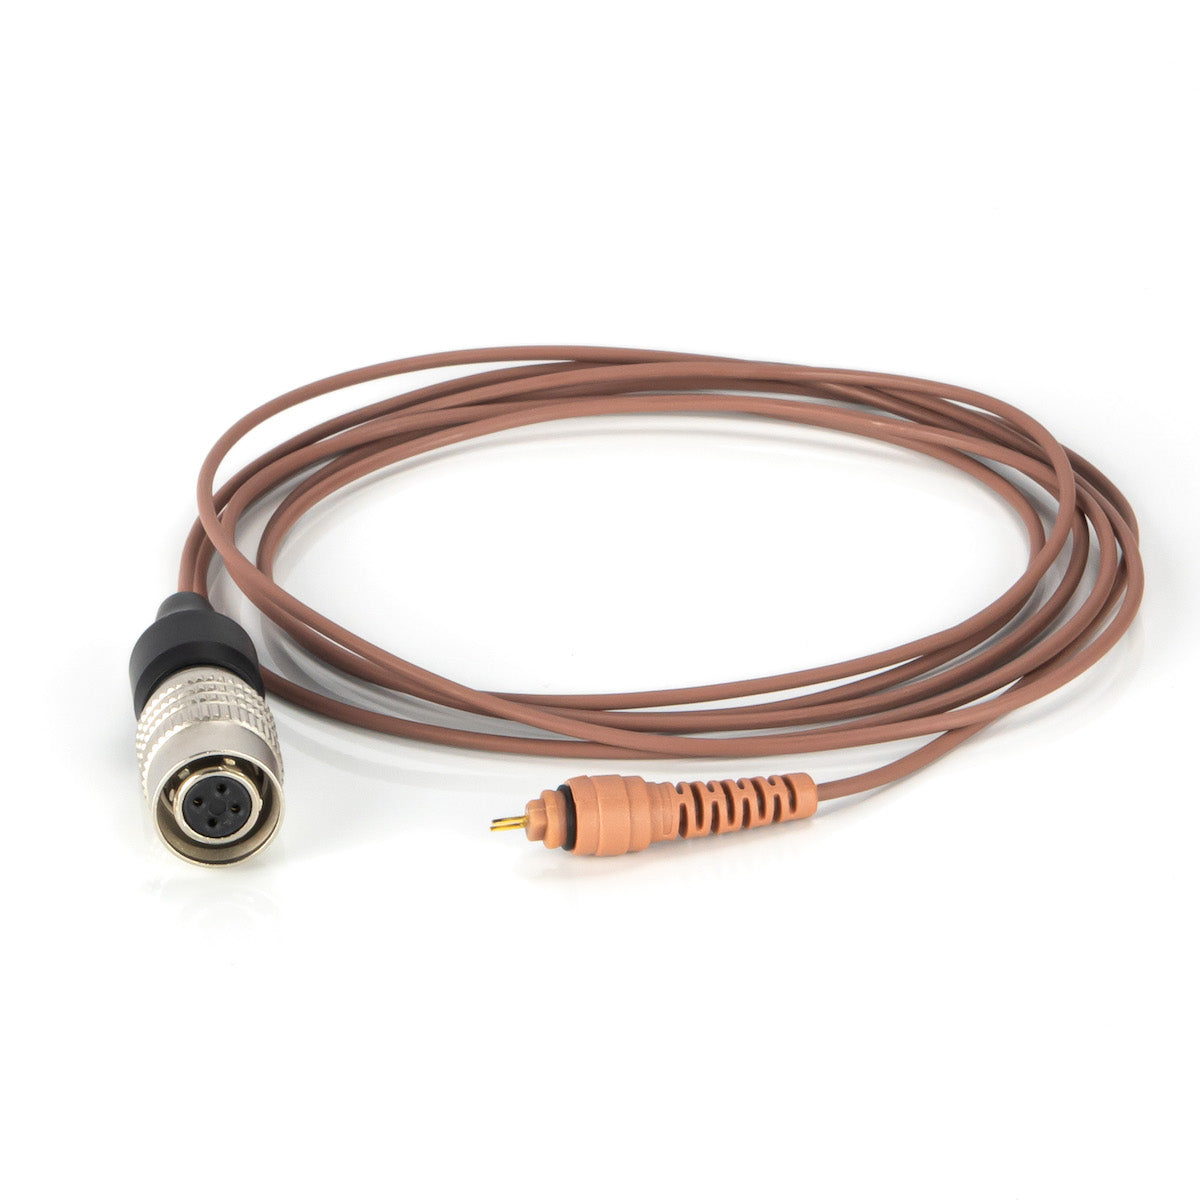 THOR Hammer SE Microphone Replacement Cable, Hilrose4 brown